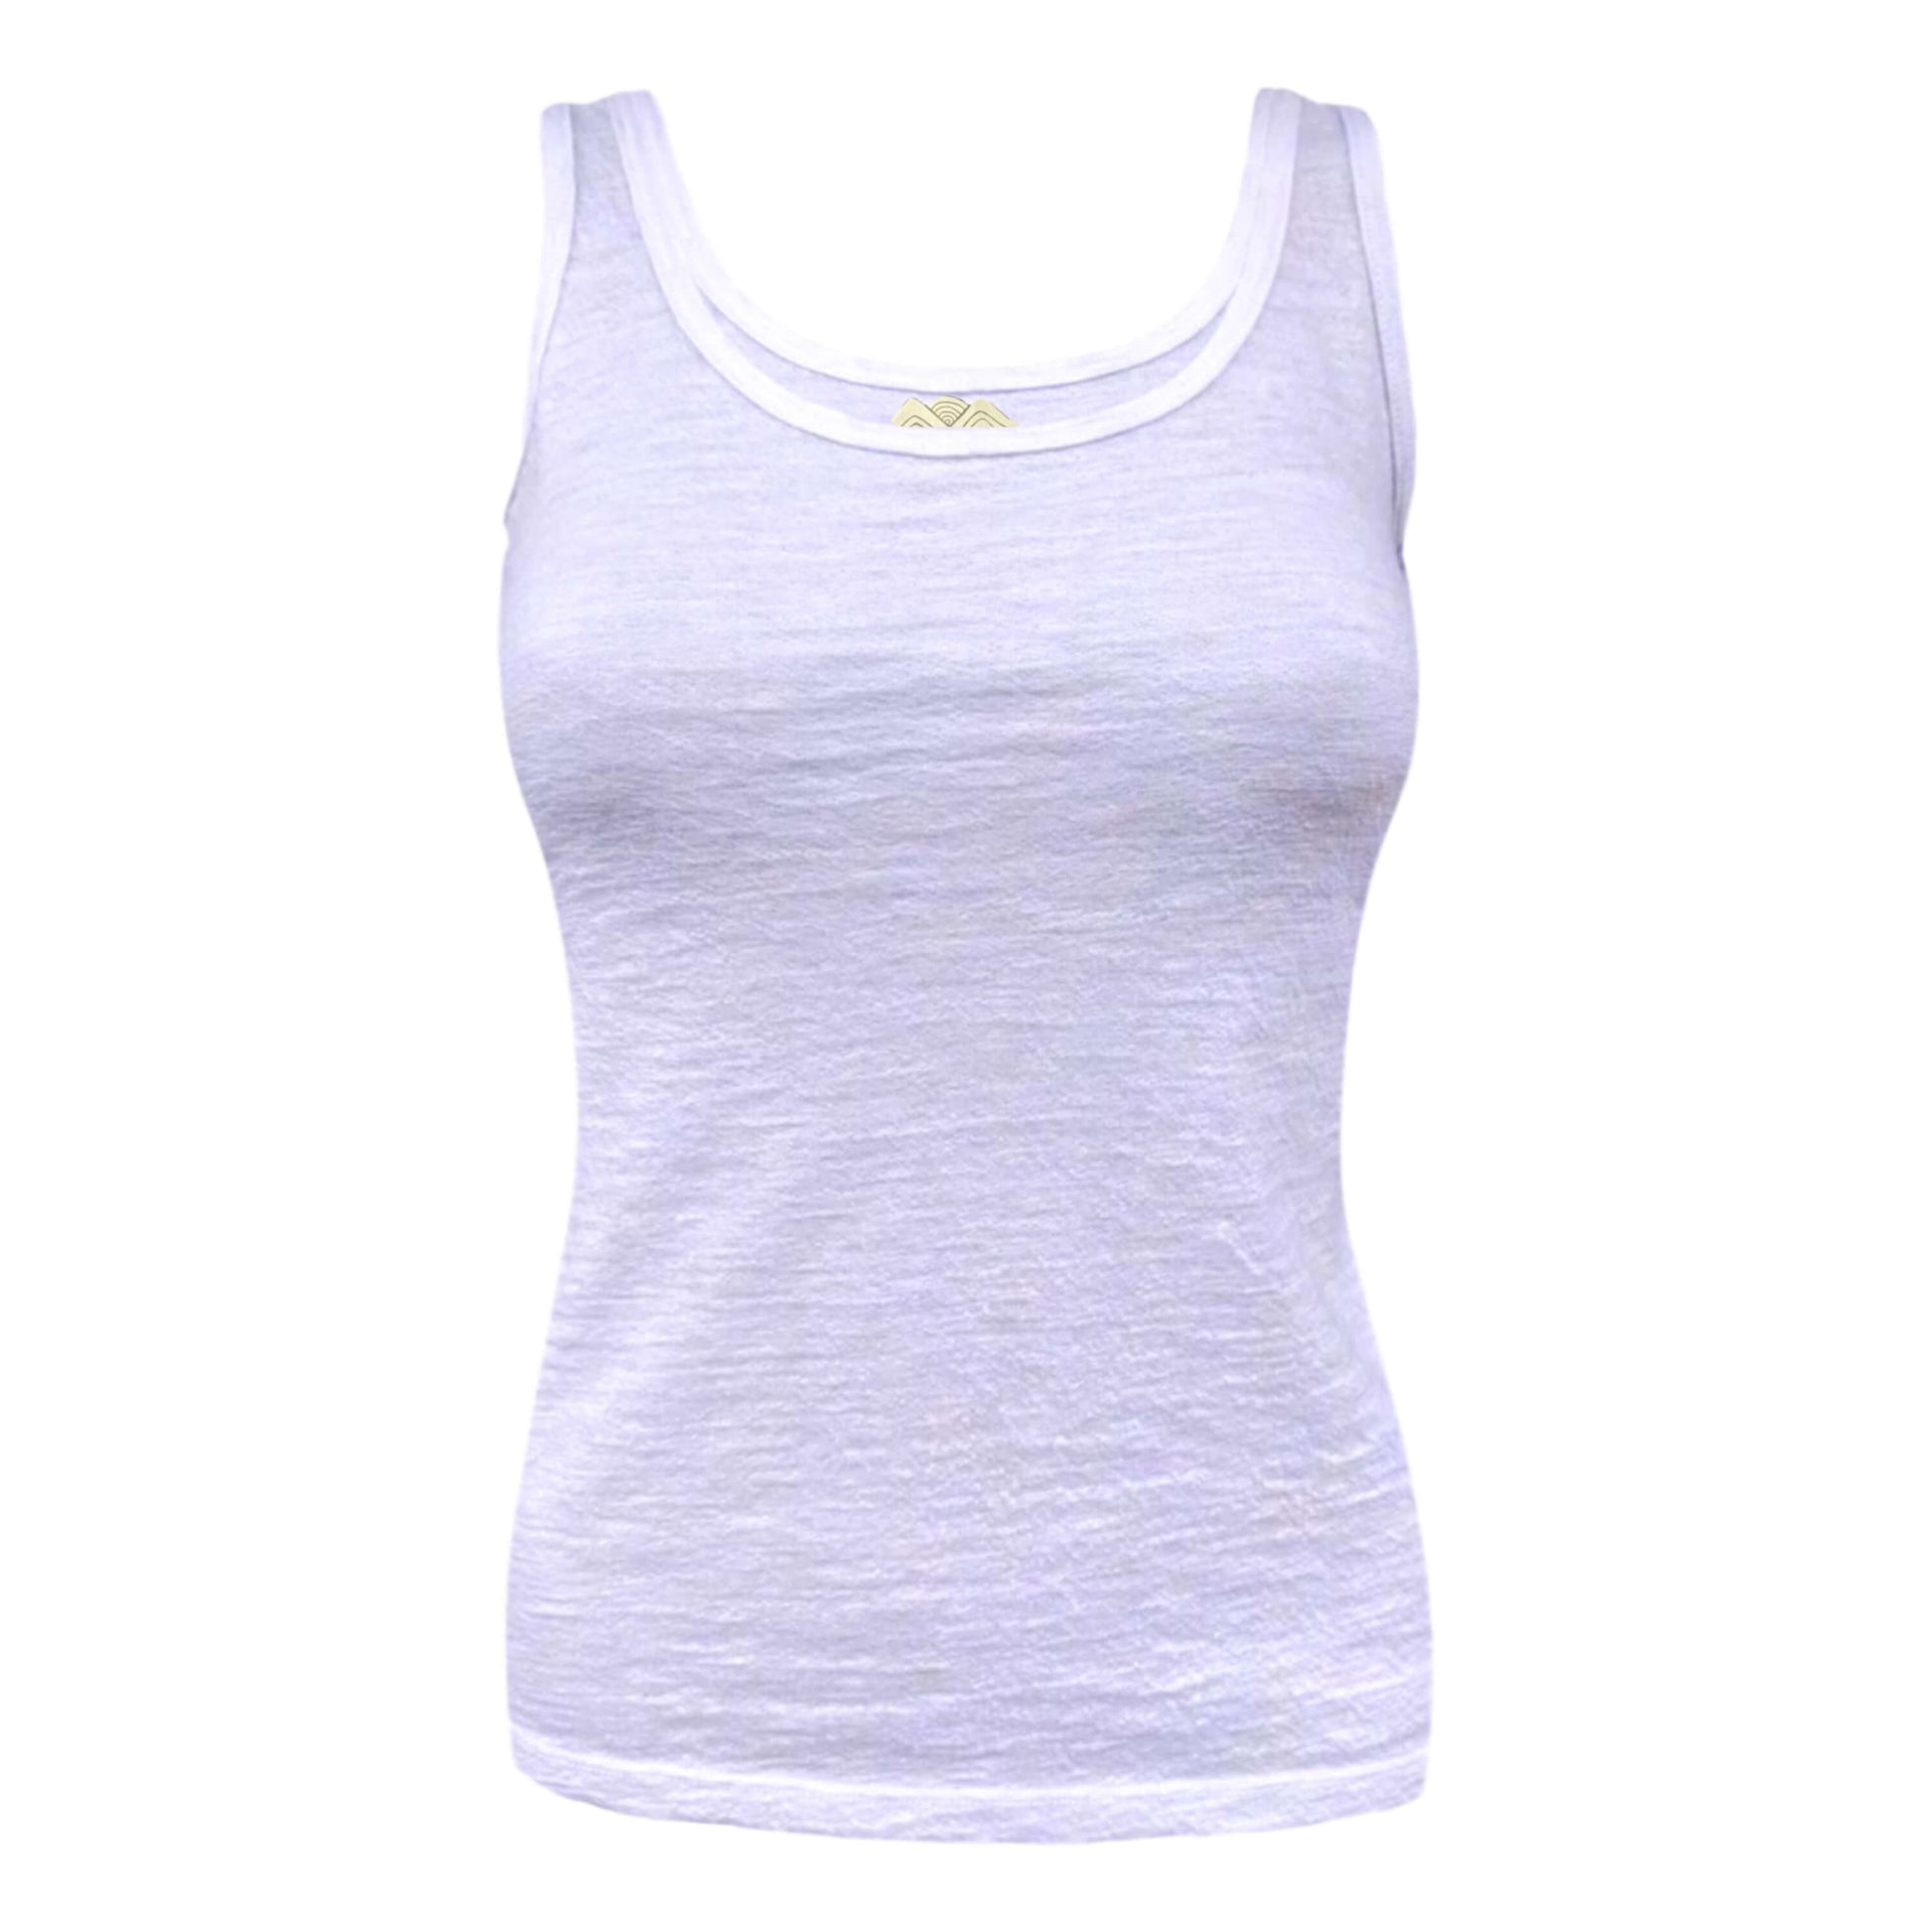 alpaca wool tank top in white for women color lilac